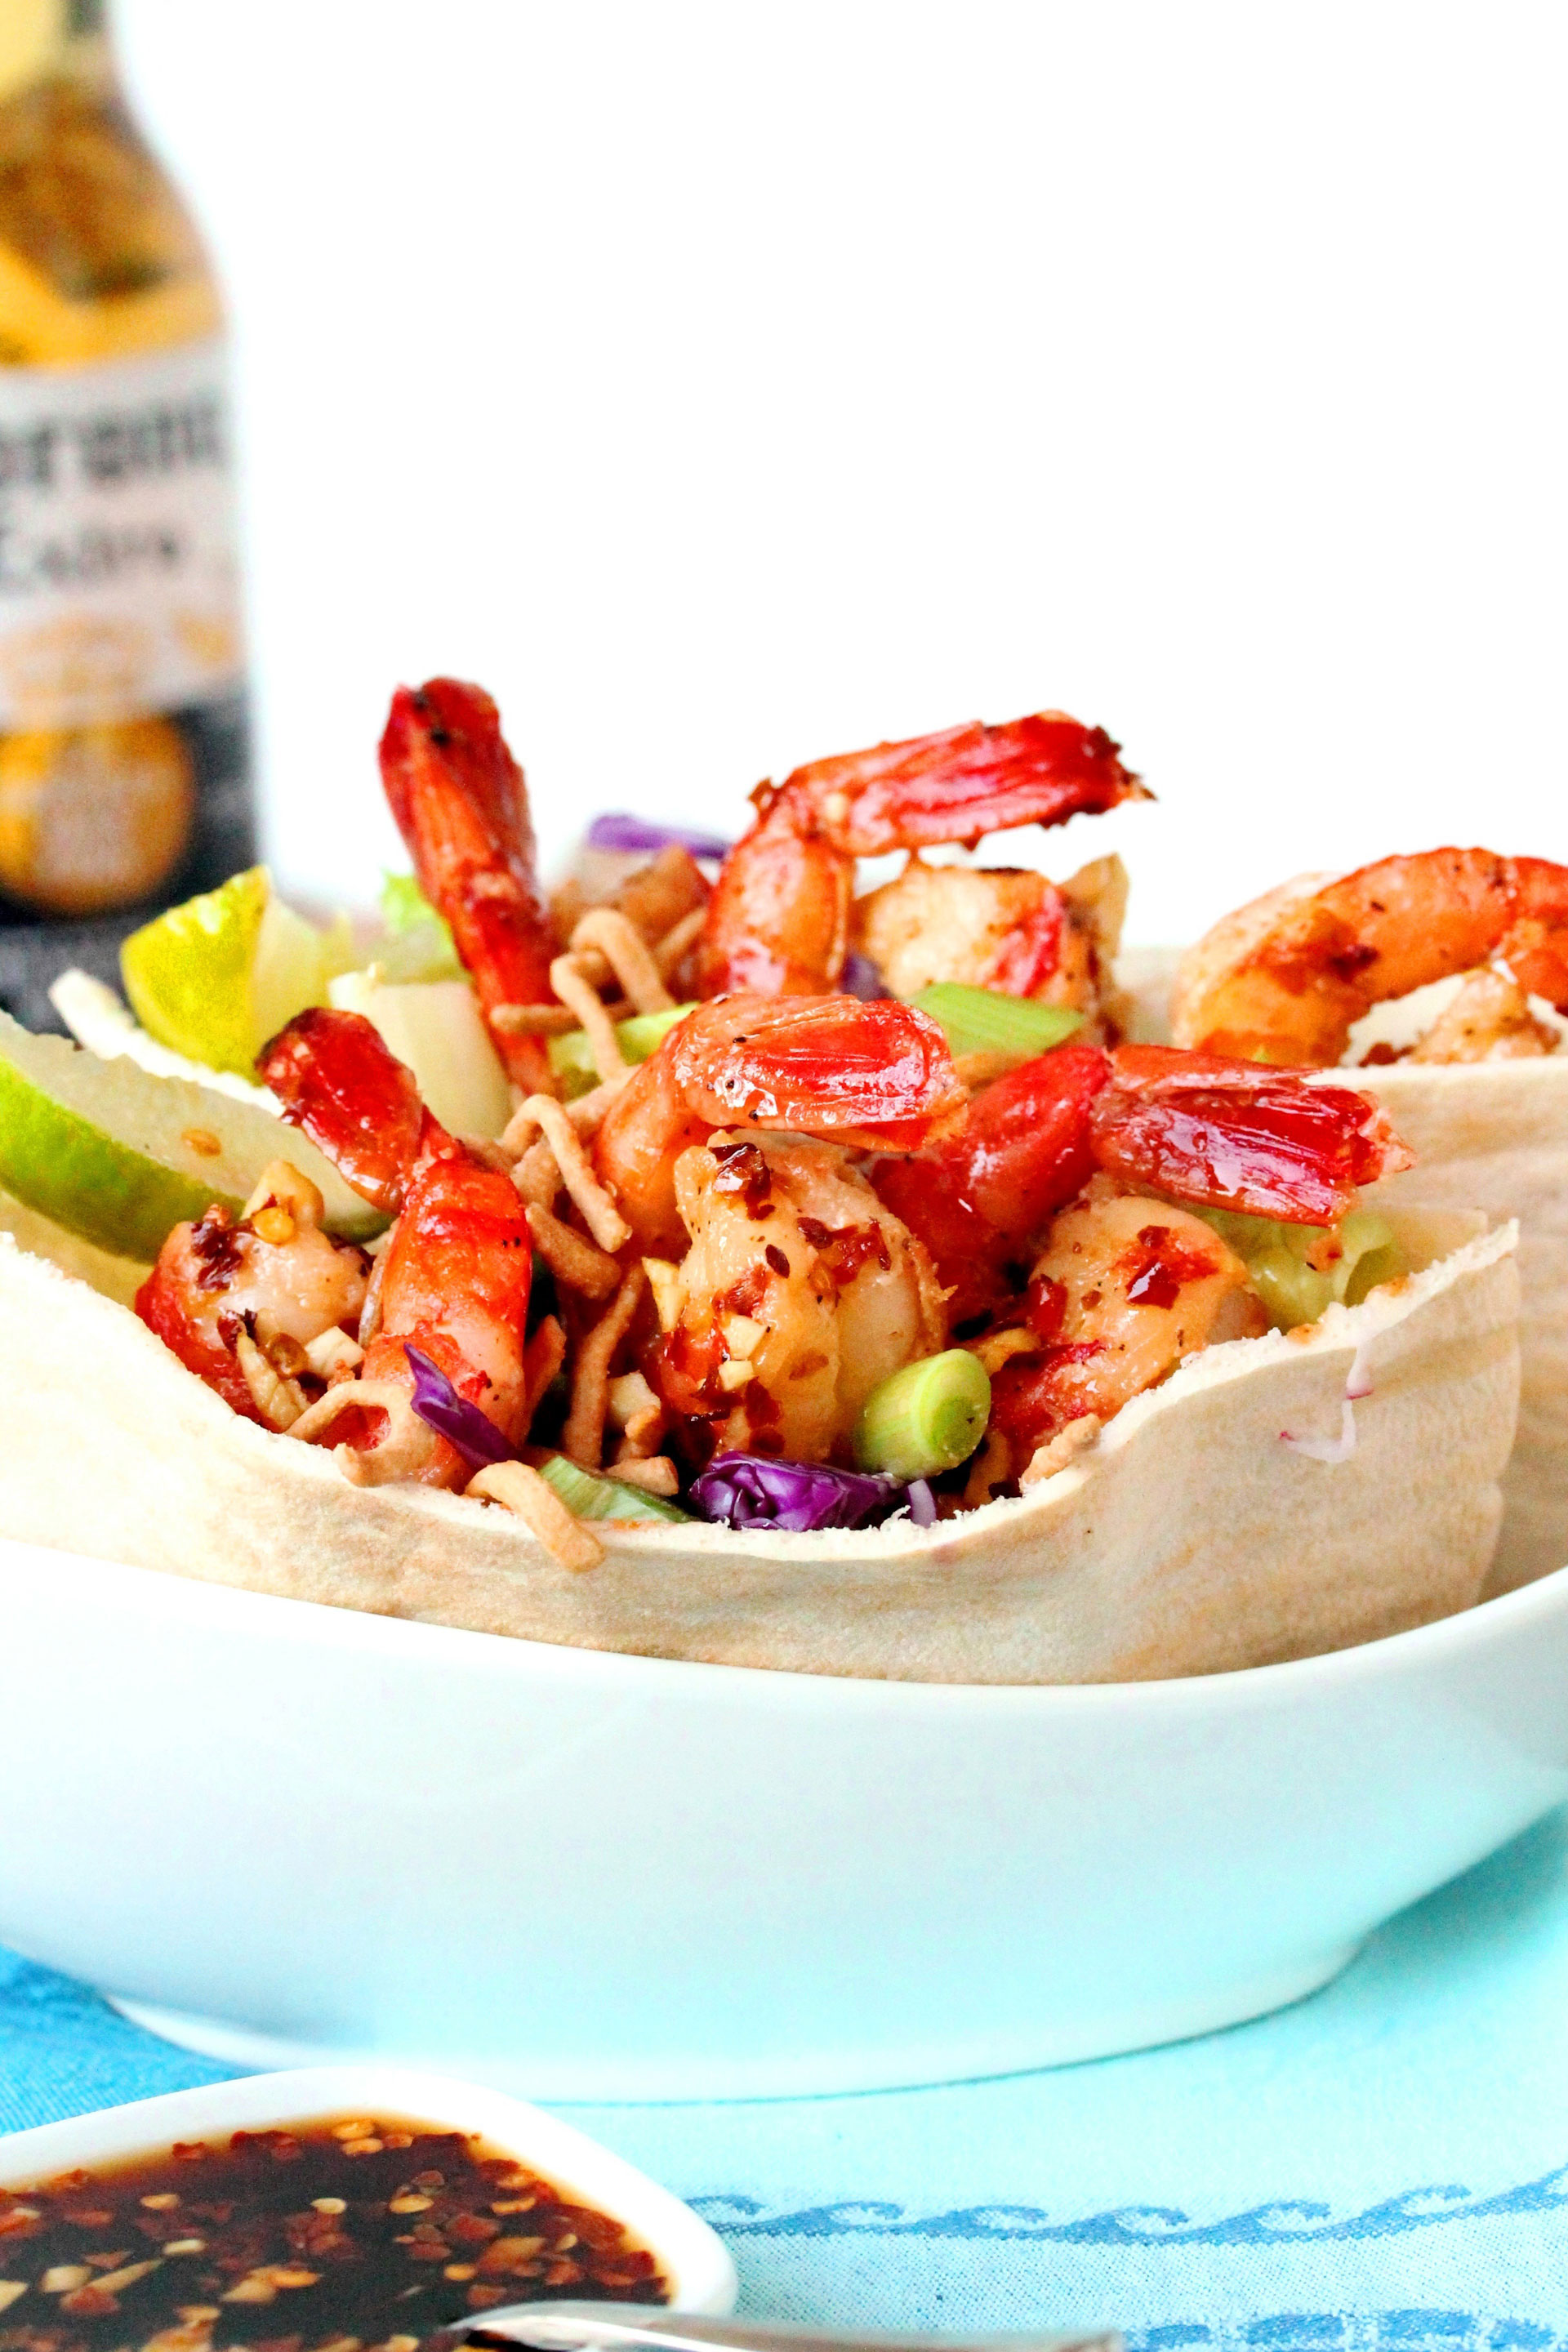 25-Minute sweet and spicy Thai shrimp salad in a pita